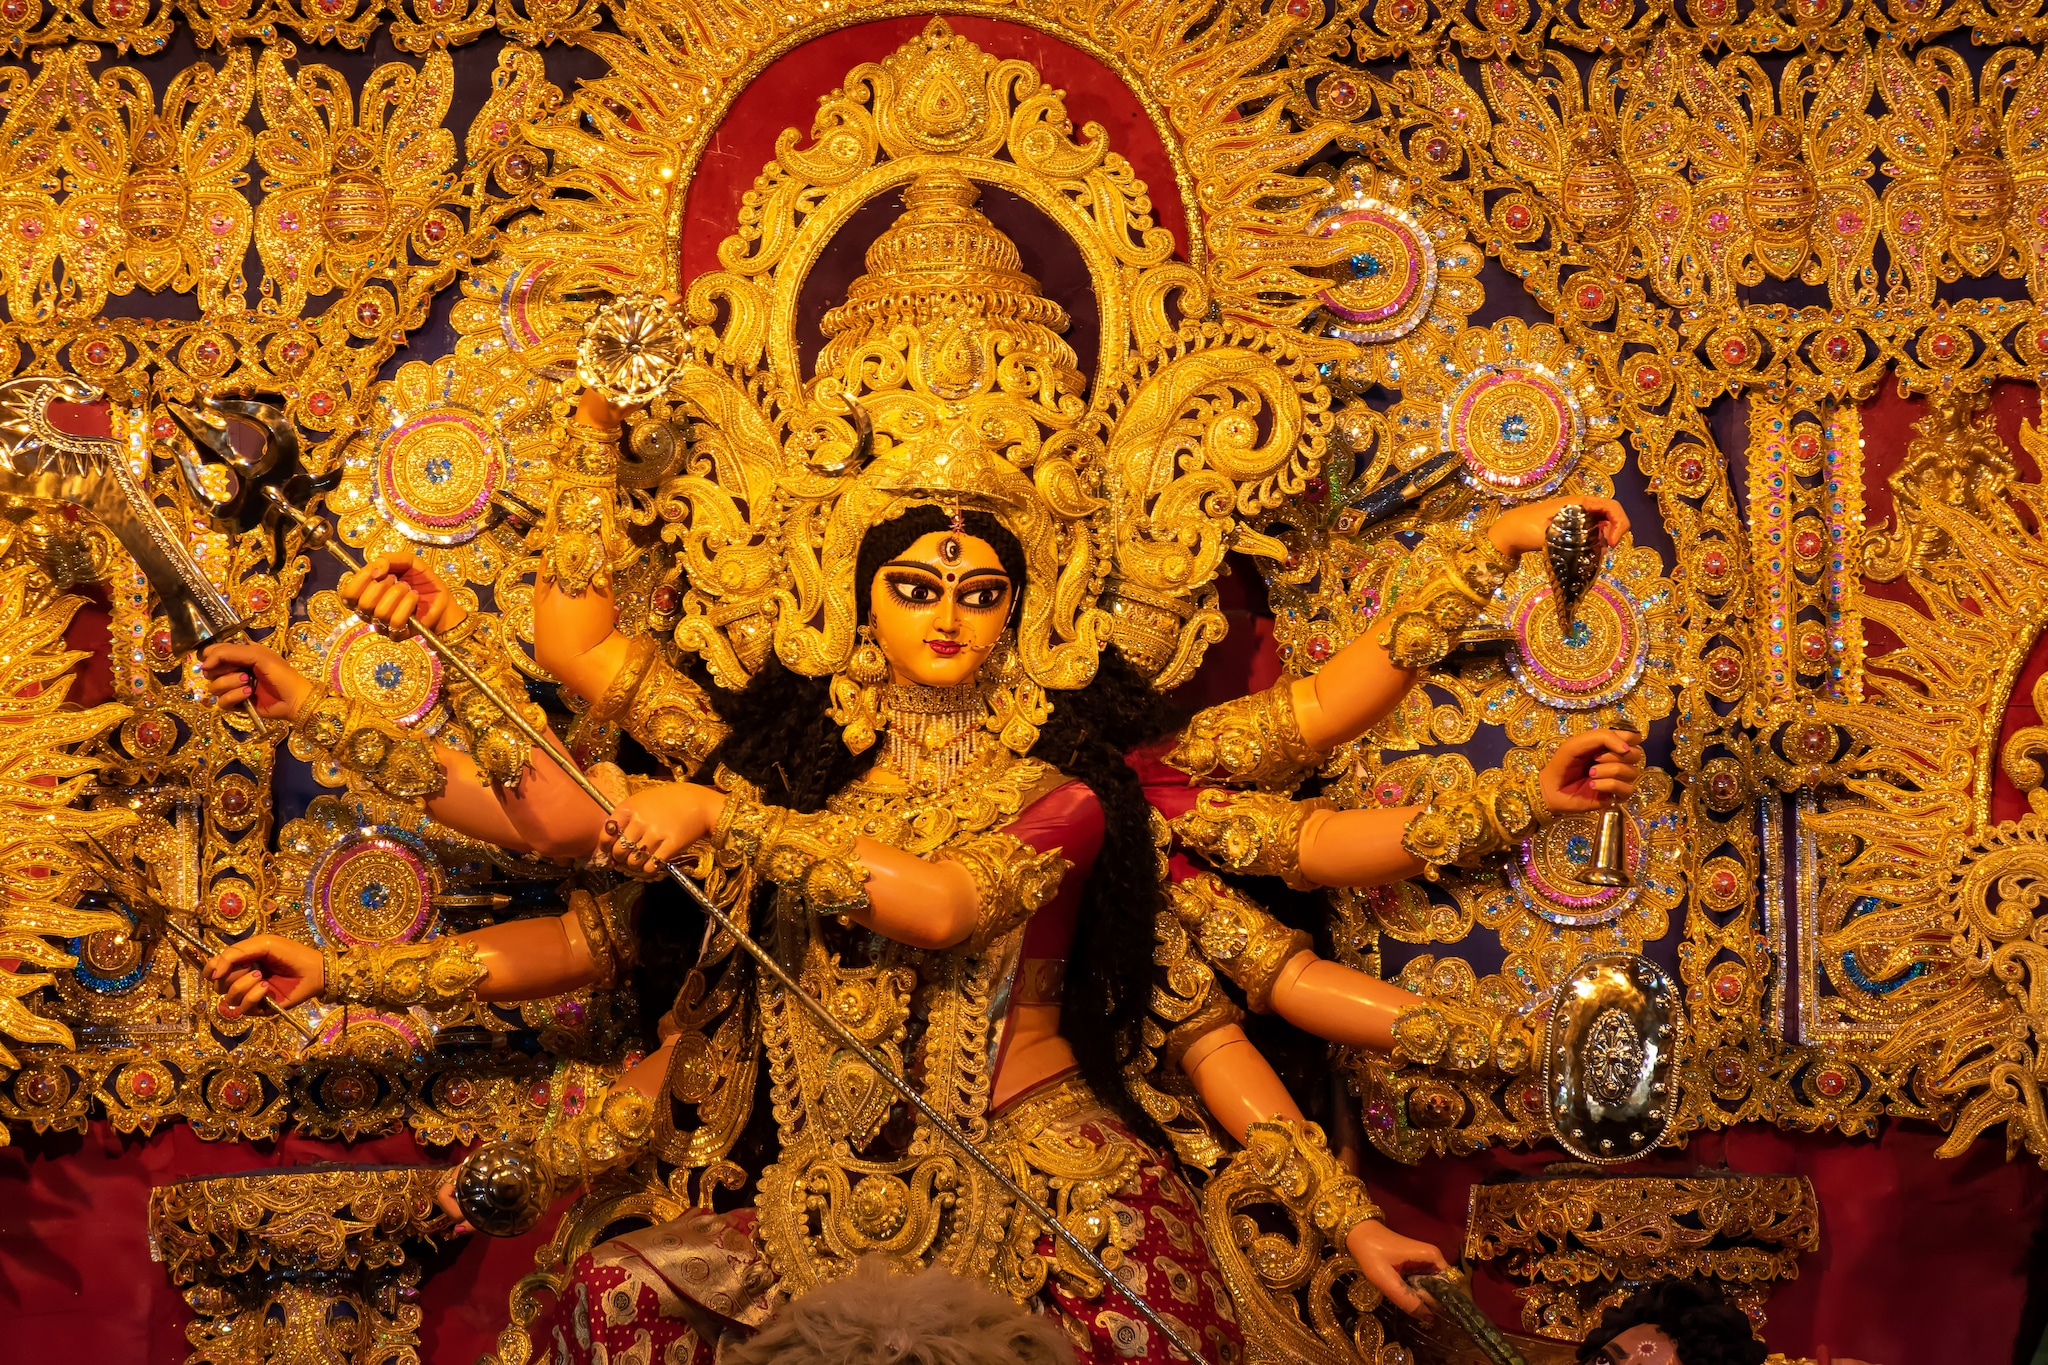 The ten arms of the Goddess Durga signify the protection of her devotees from all directions, which are the eight corners and from the sky and the earth. (Representative image: Shutterstock)